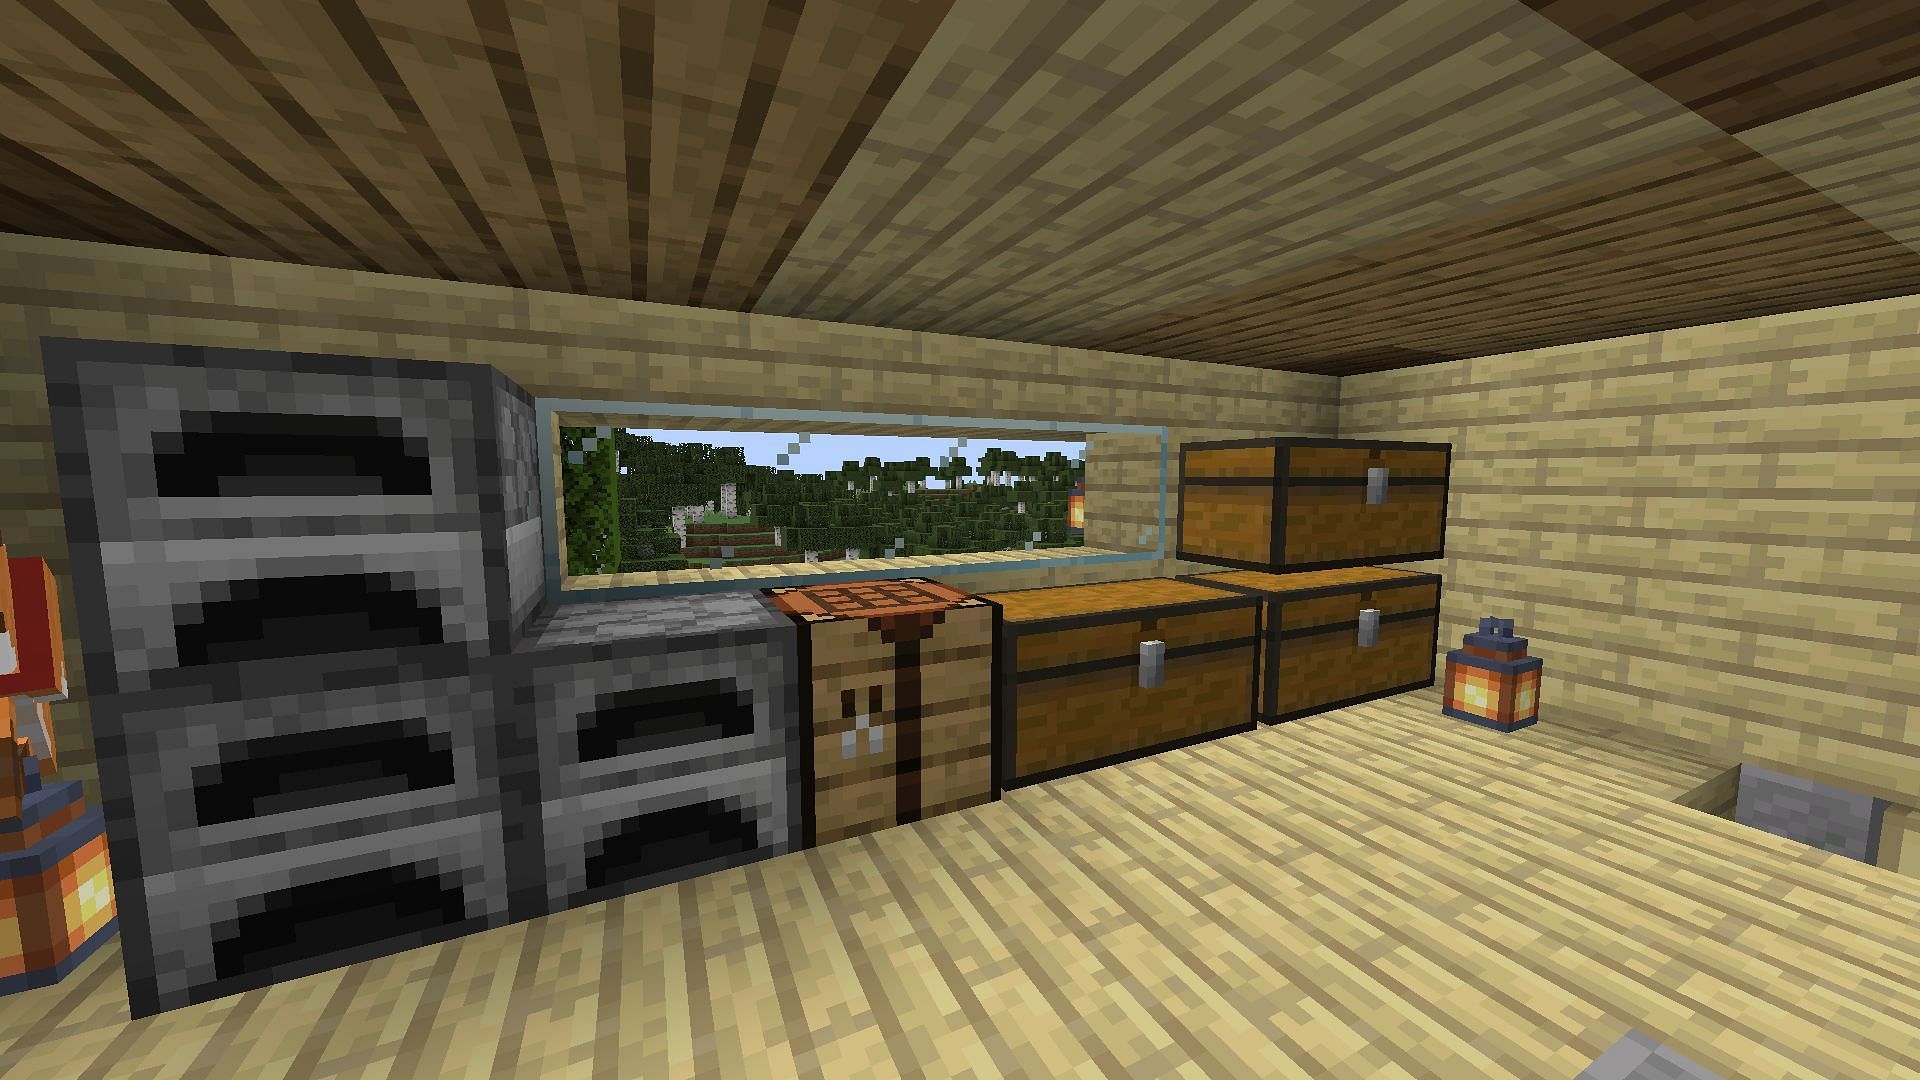 Simple crafting and smelting area in Minecraft (Image via Mojang)